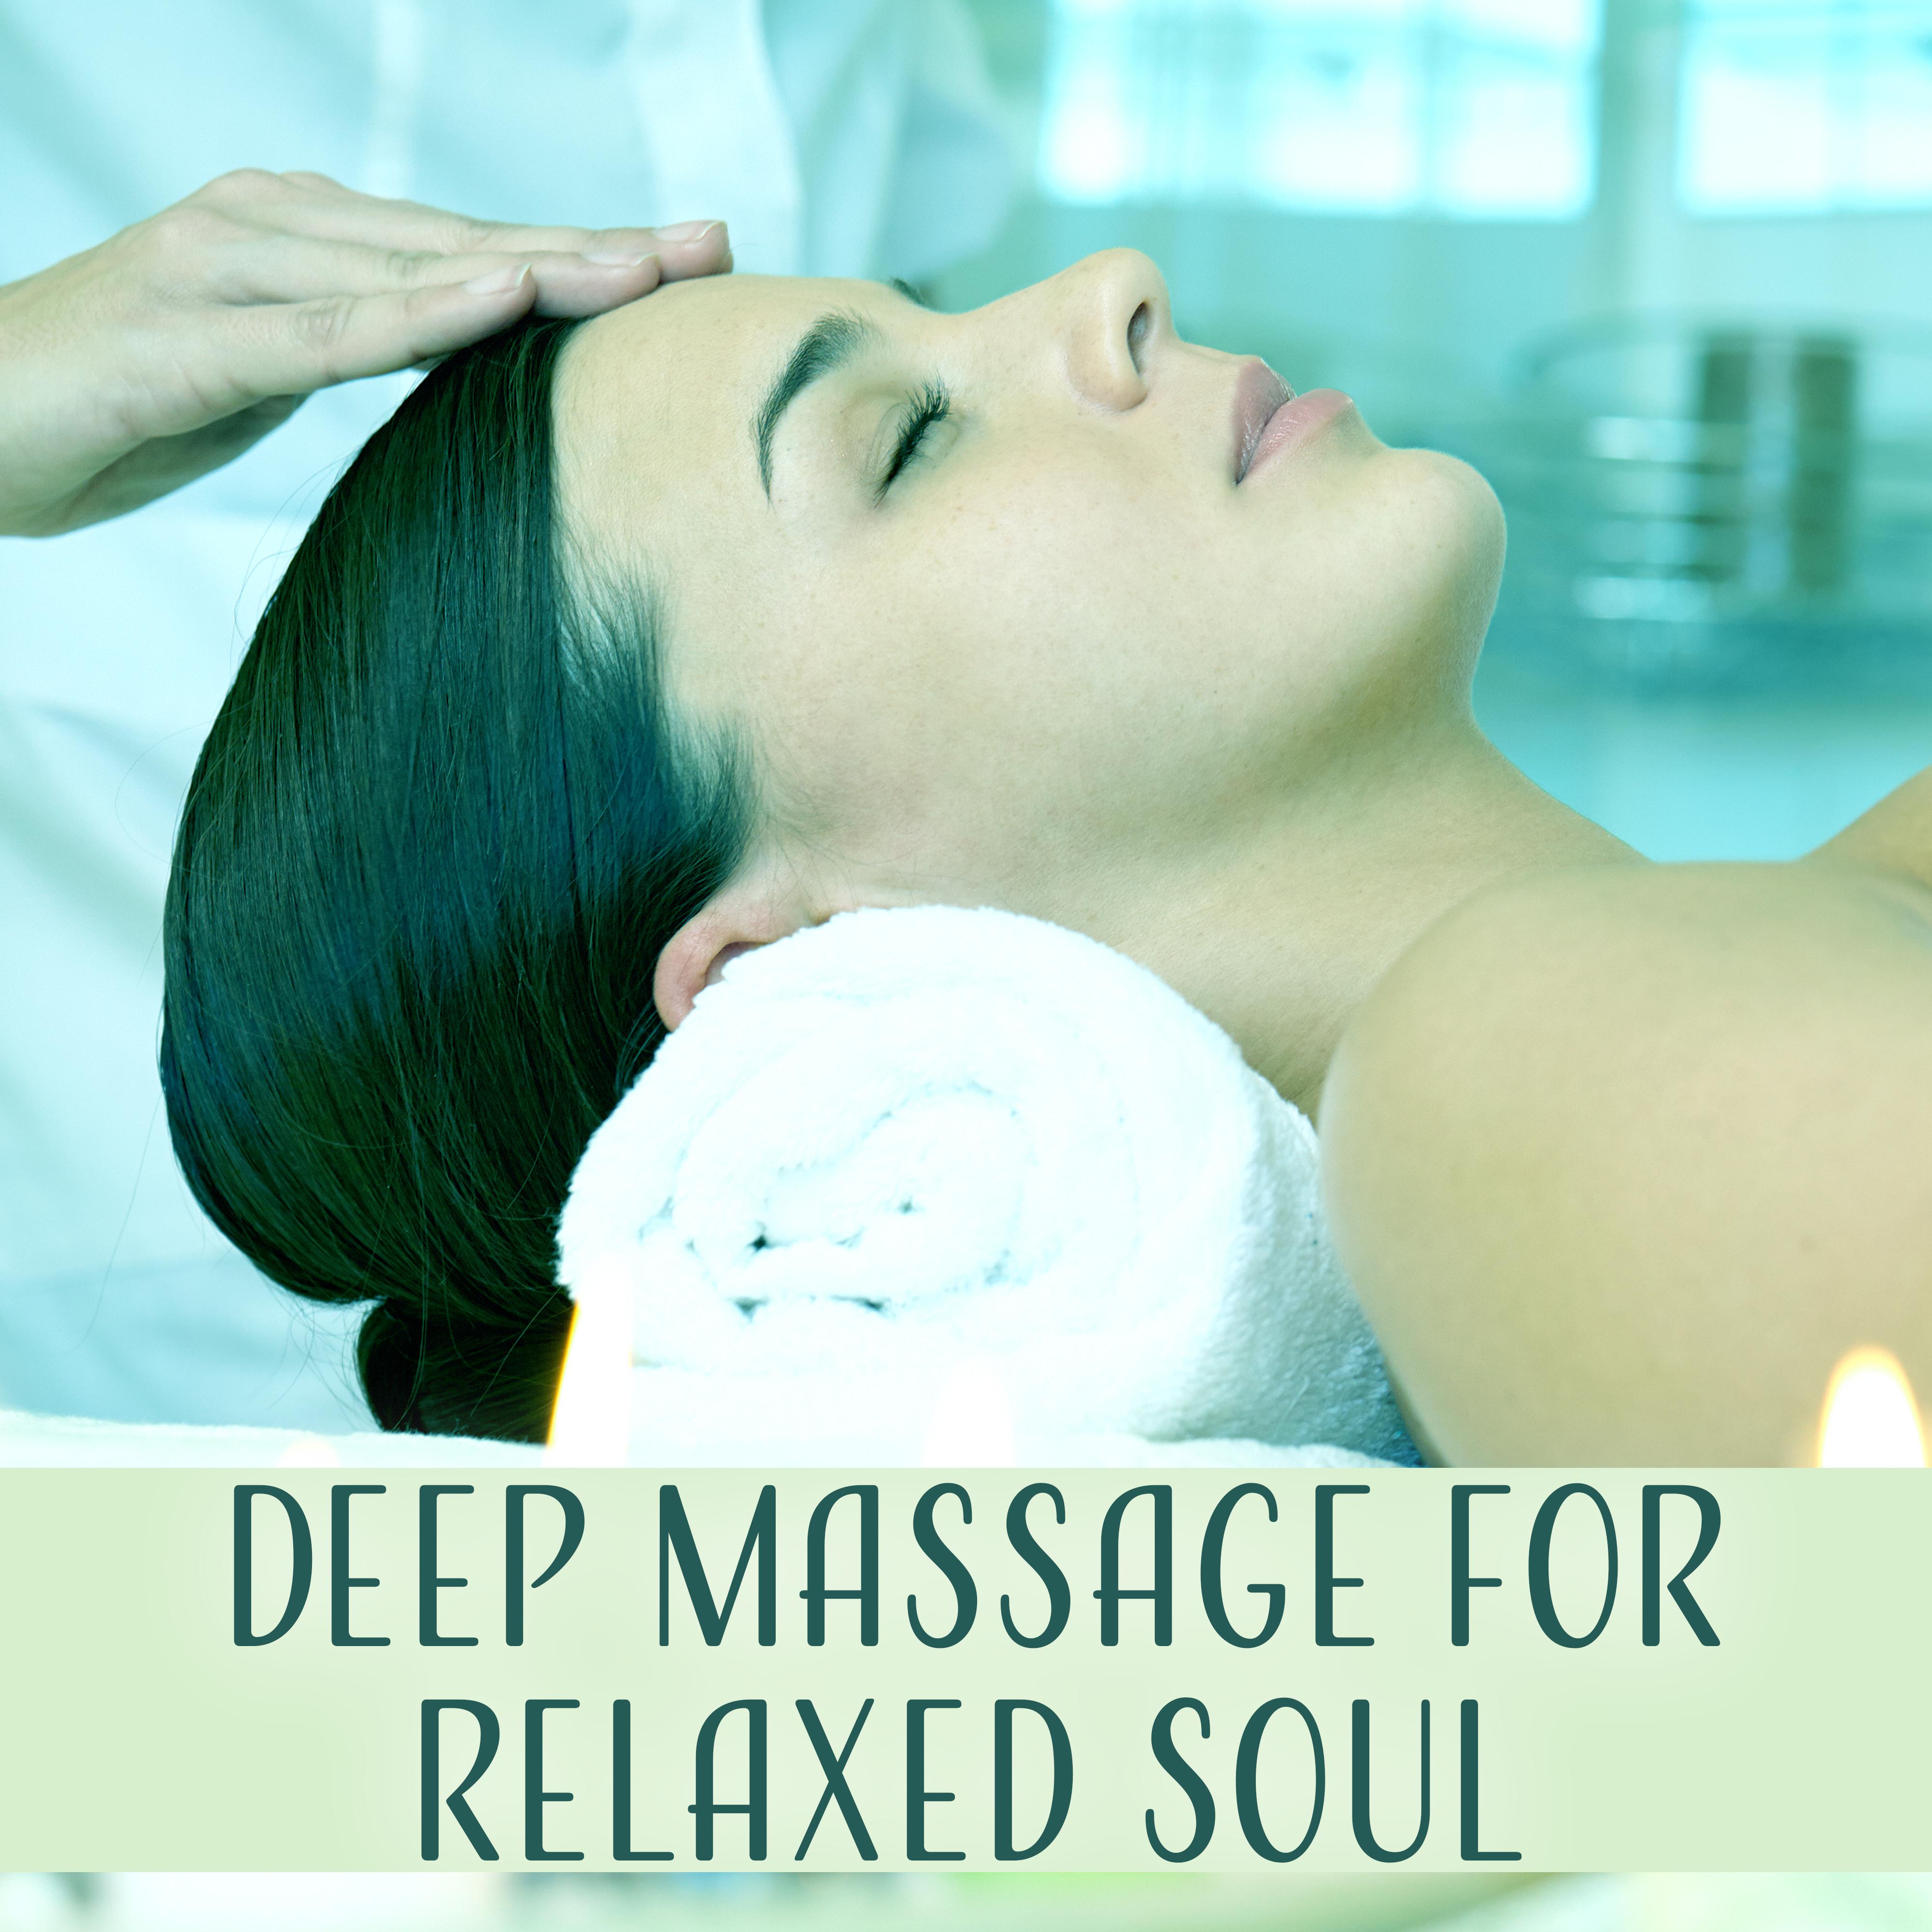 Deep Massage for Relaxed Soul  Spa Music, Relaxation Sounds for Wellness, Deep Sleep, Serenity  Relief, Calming Music